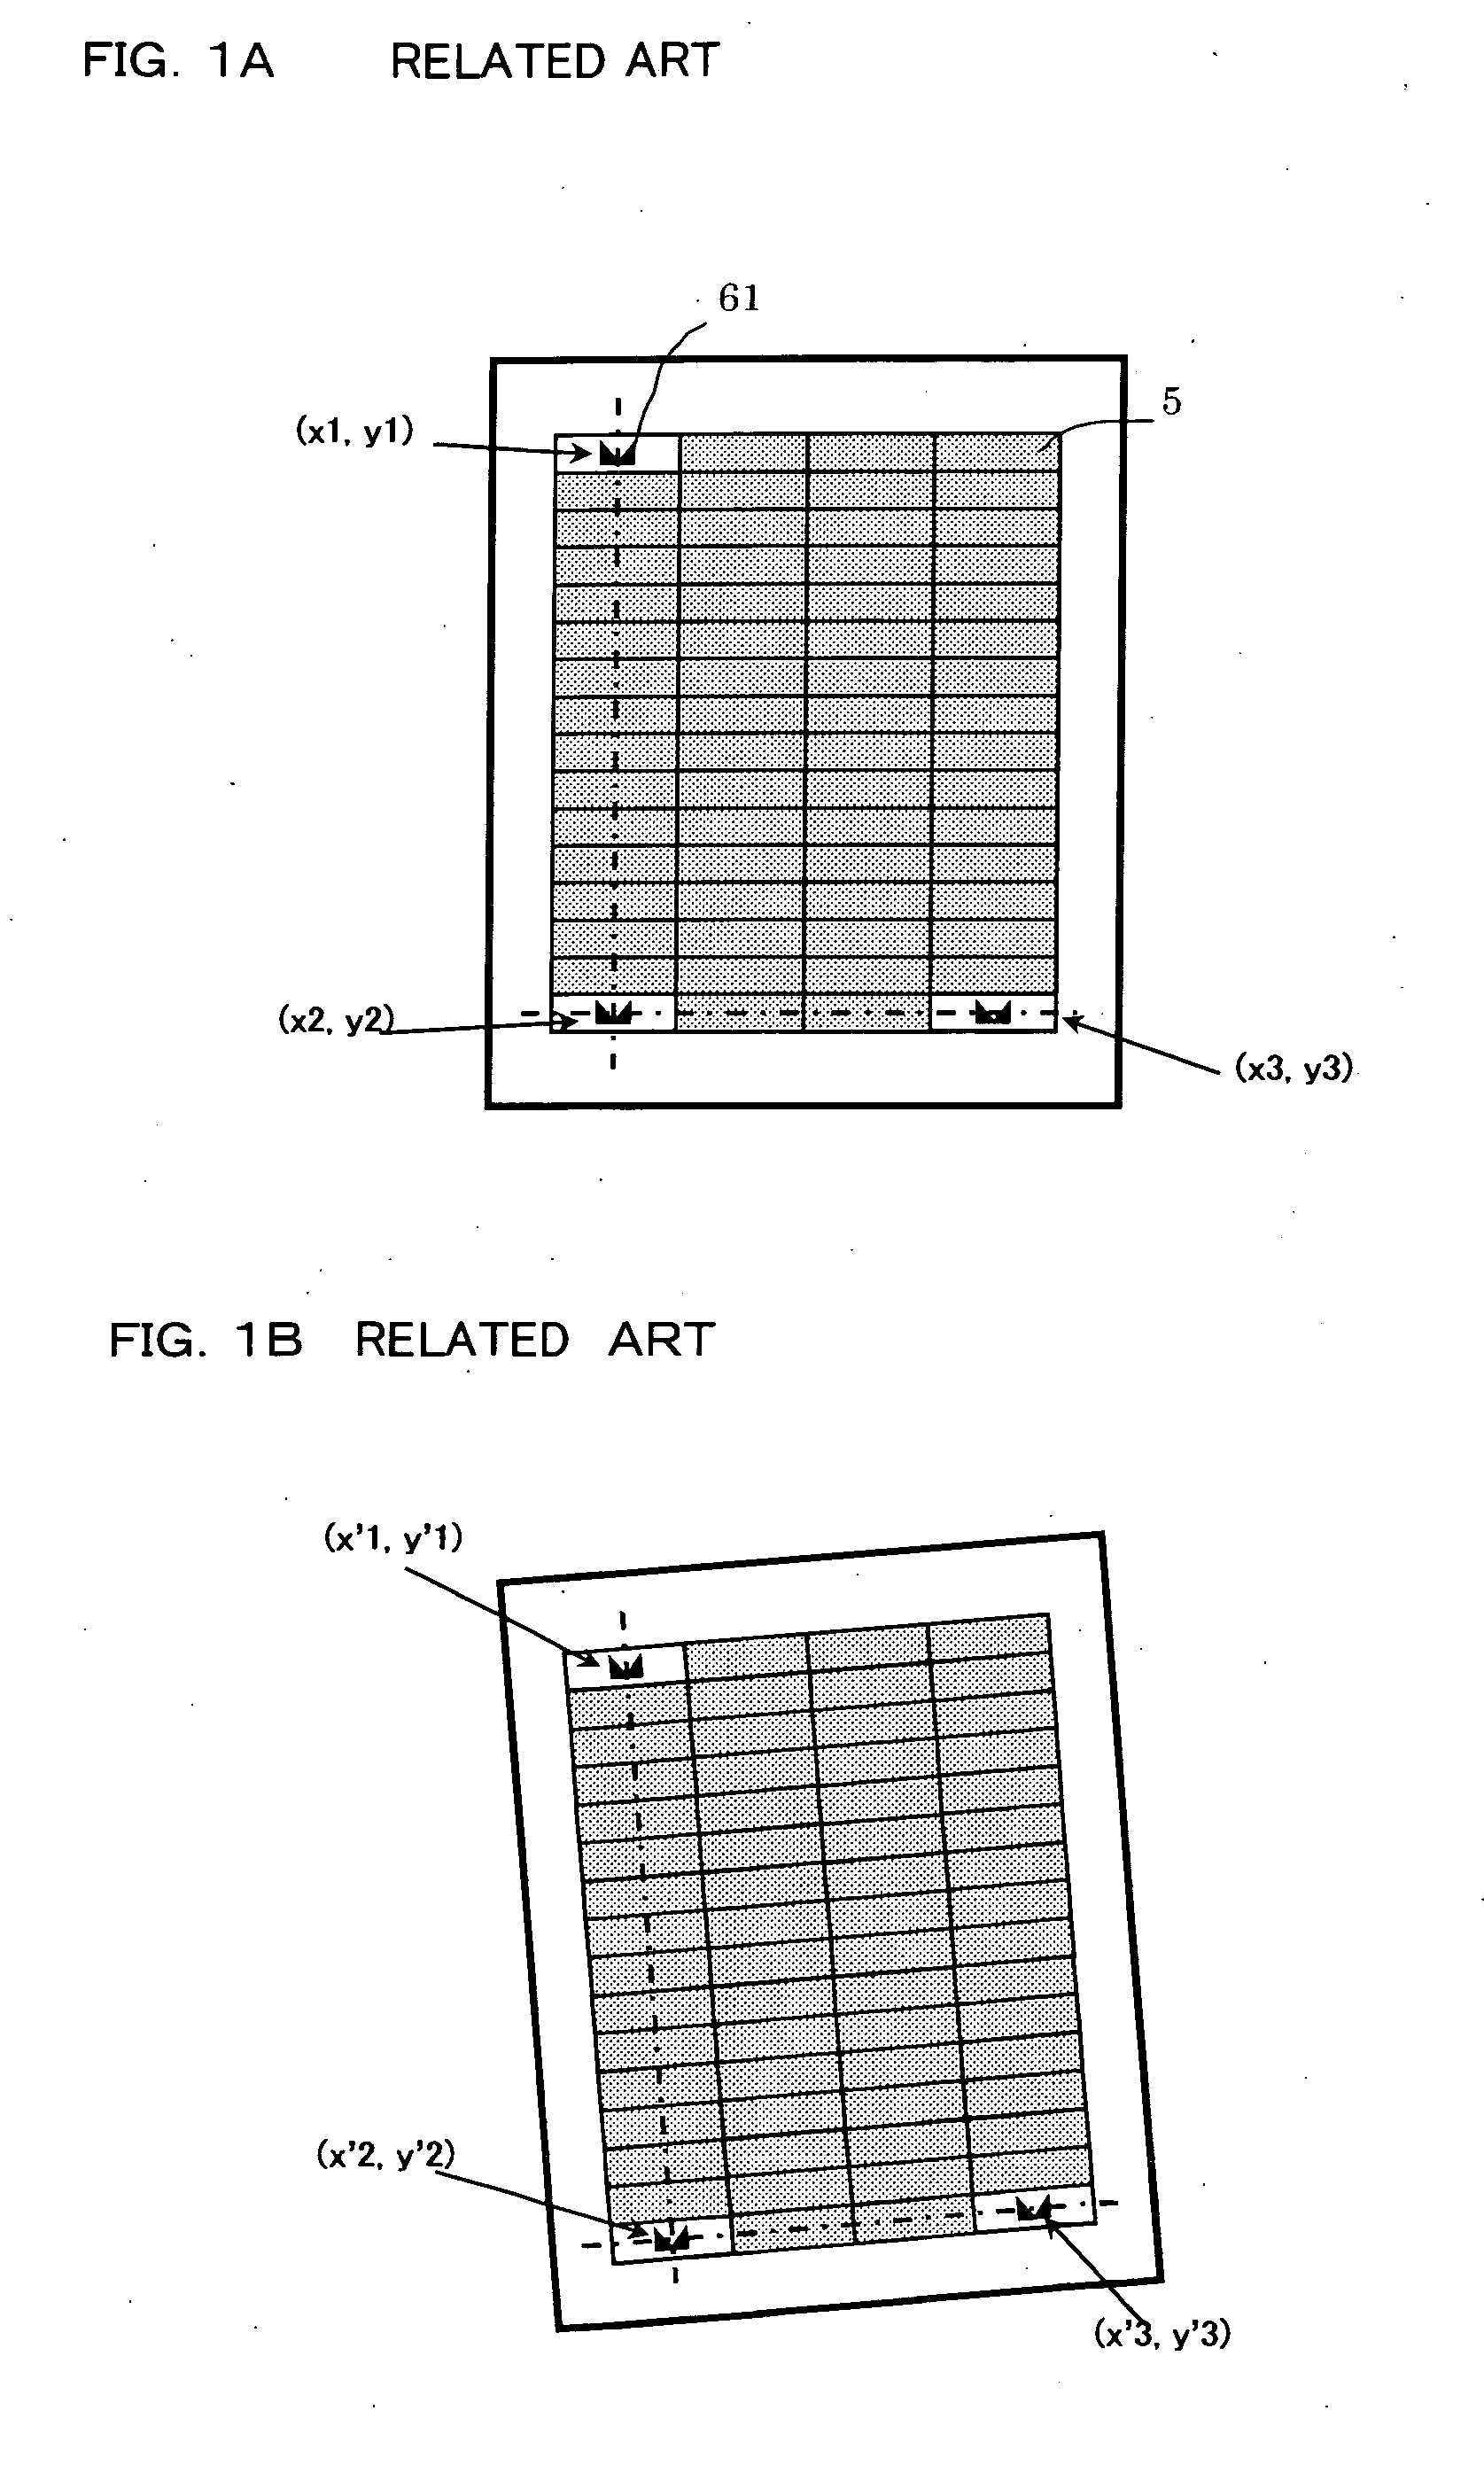 Library apparatus and position controlling method